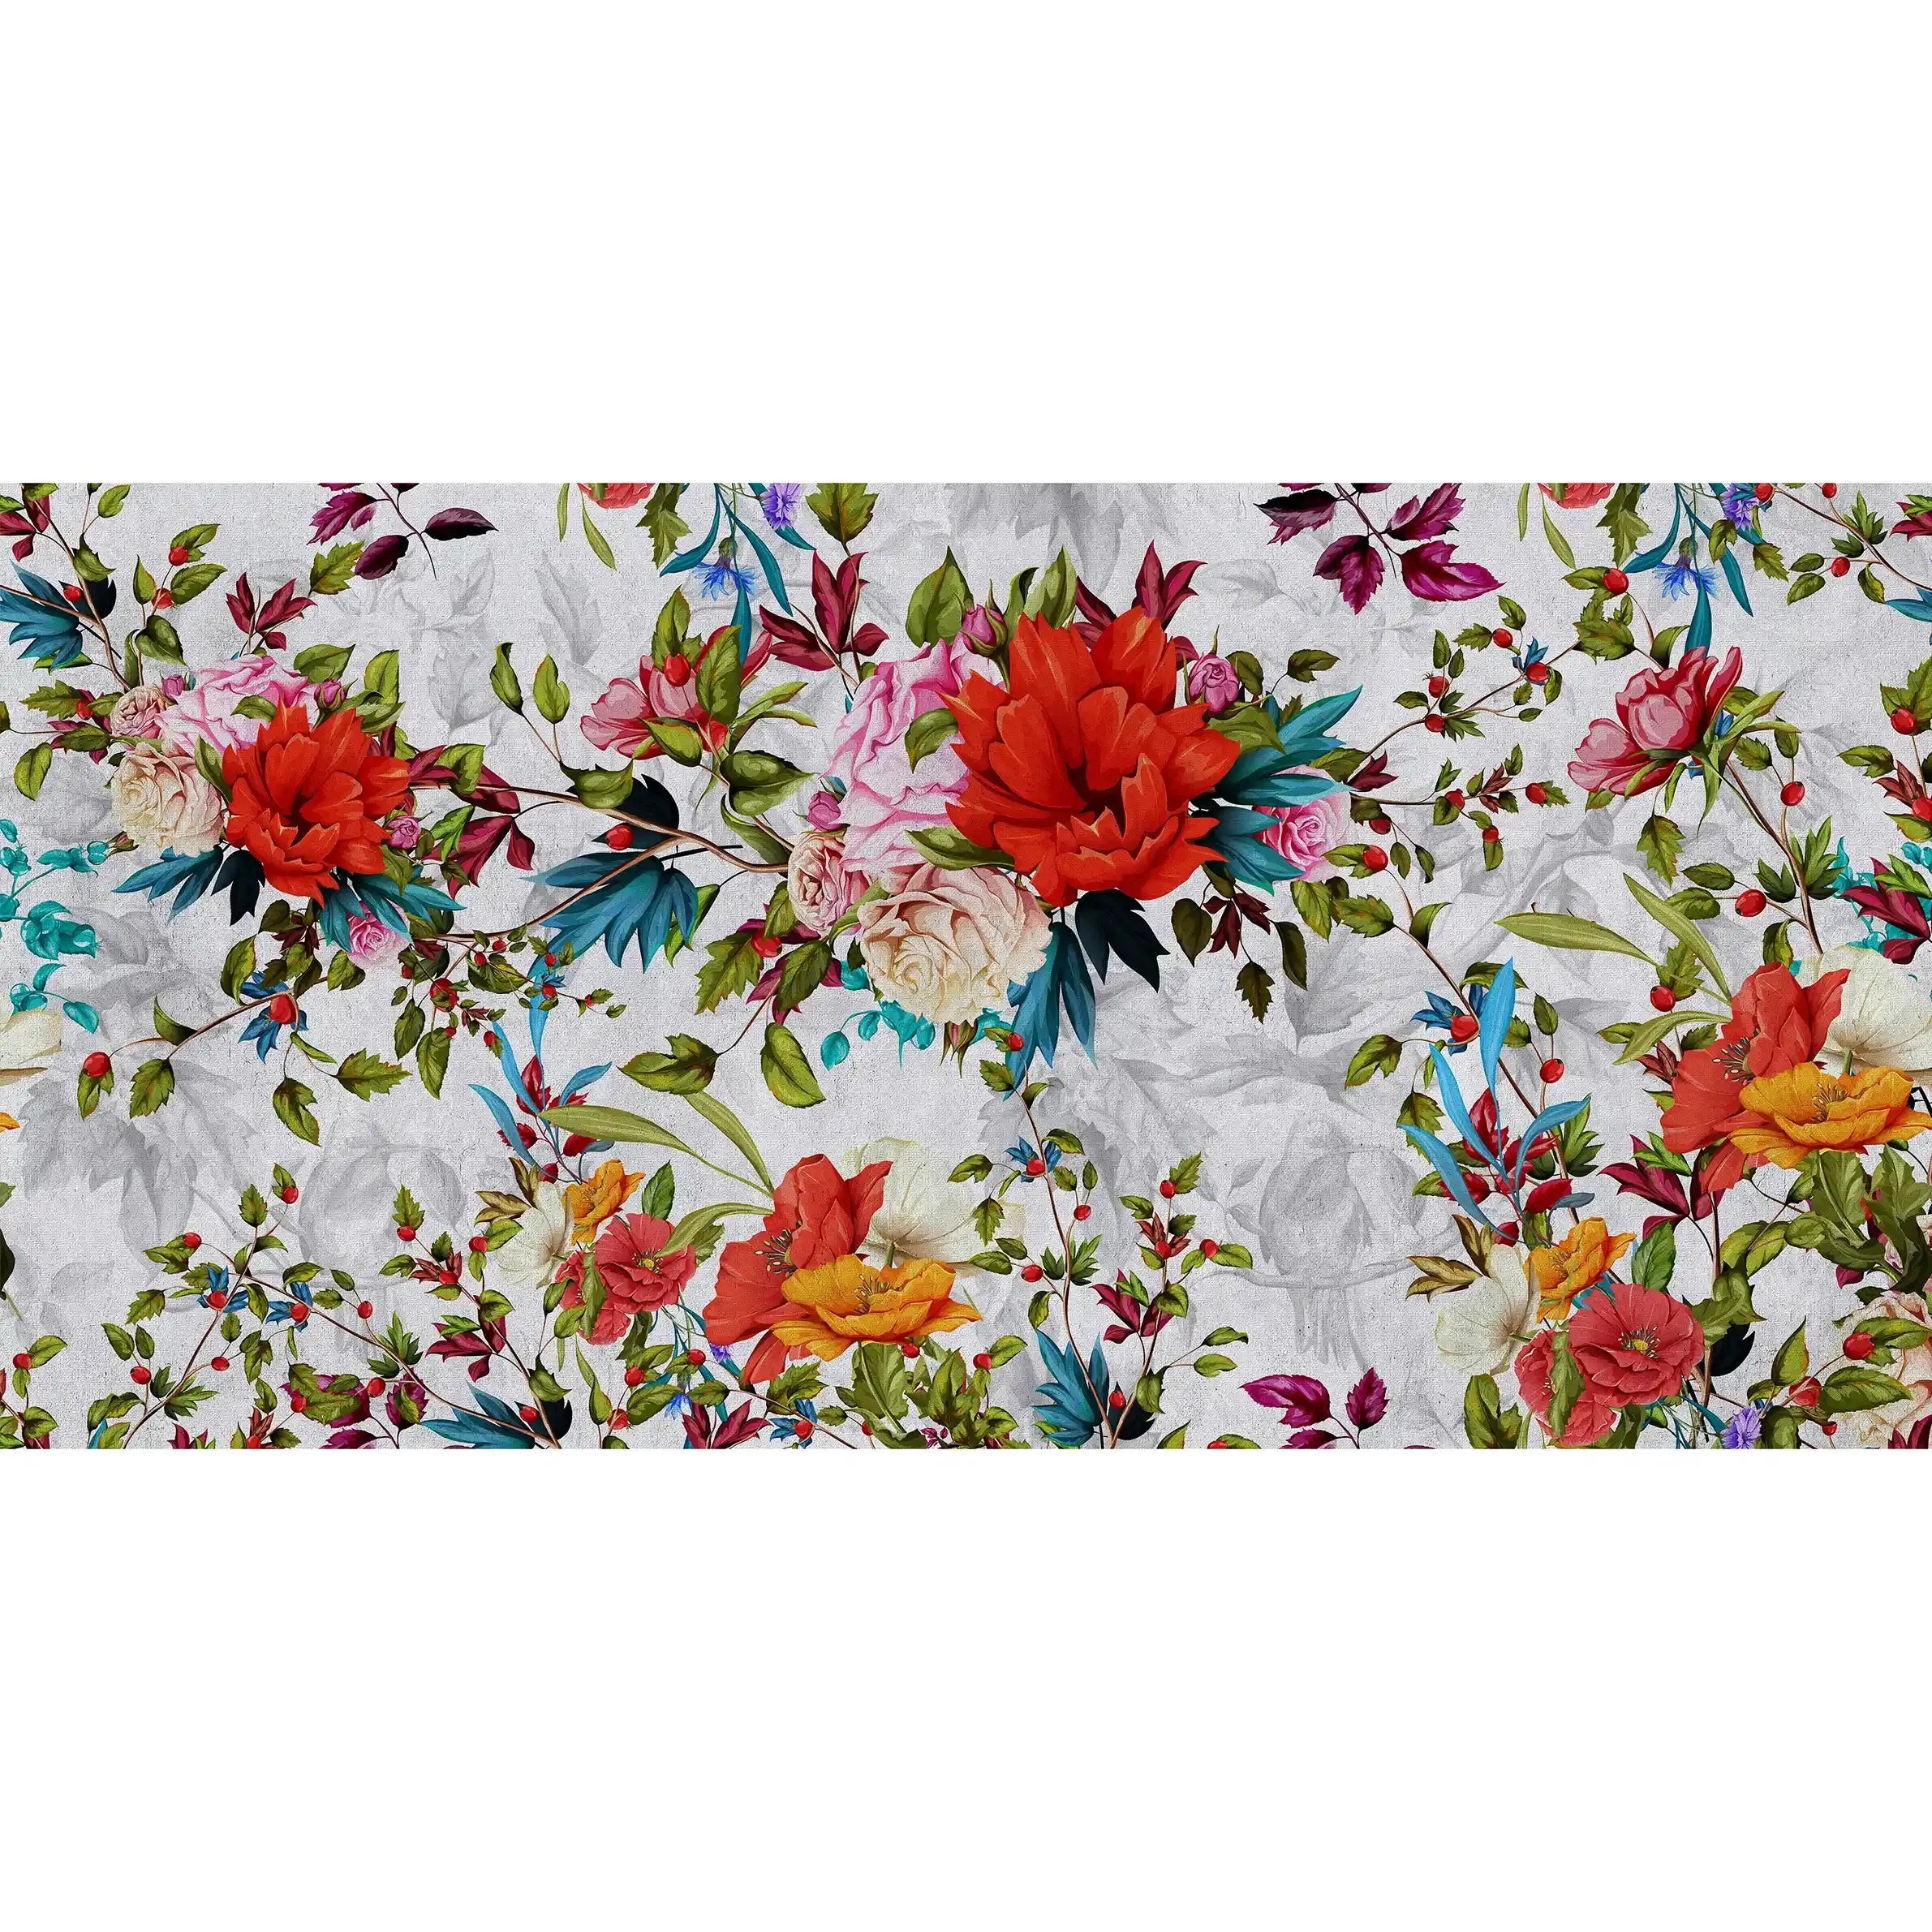 3045-A / Peel and Stick Wallpaper Floral - Large Red Flowers Design, Adhesive Decorative Paper for Bedroom, Kitchen, and Bathroom - Artevella